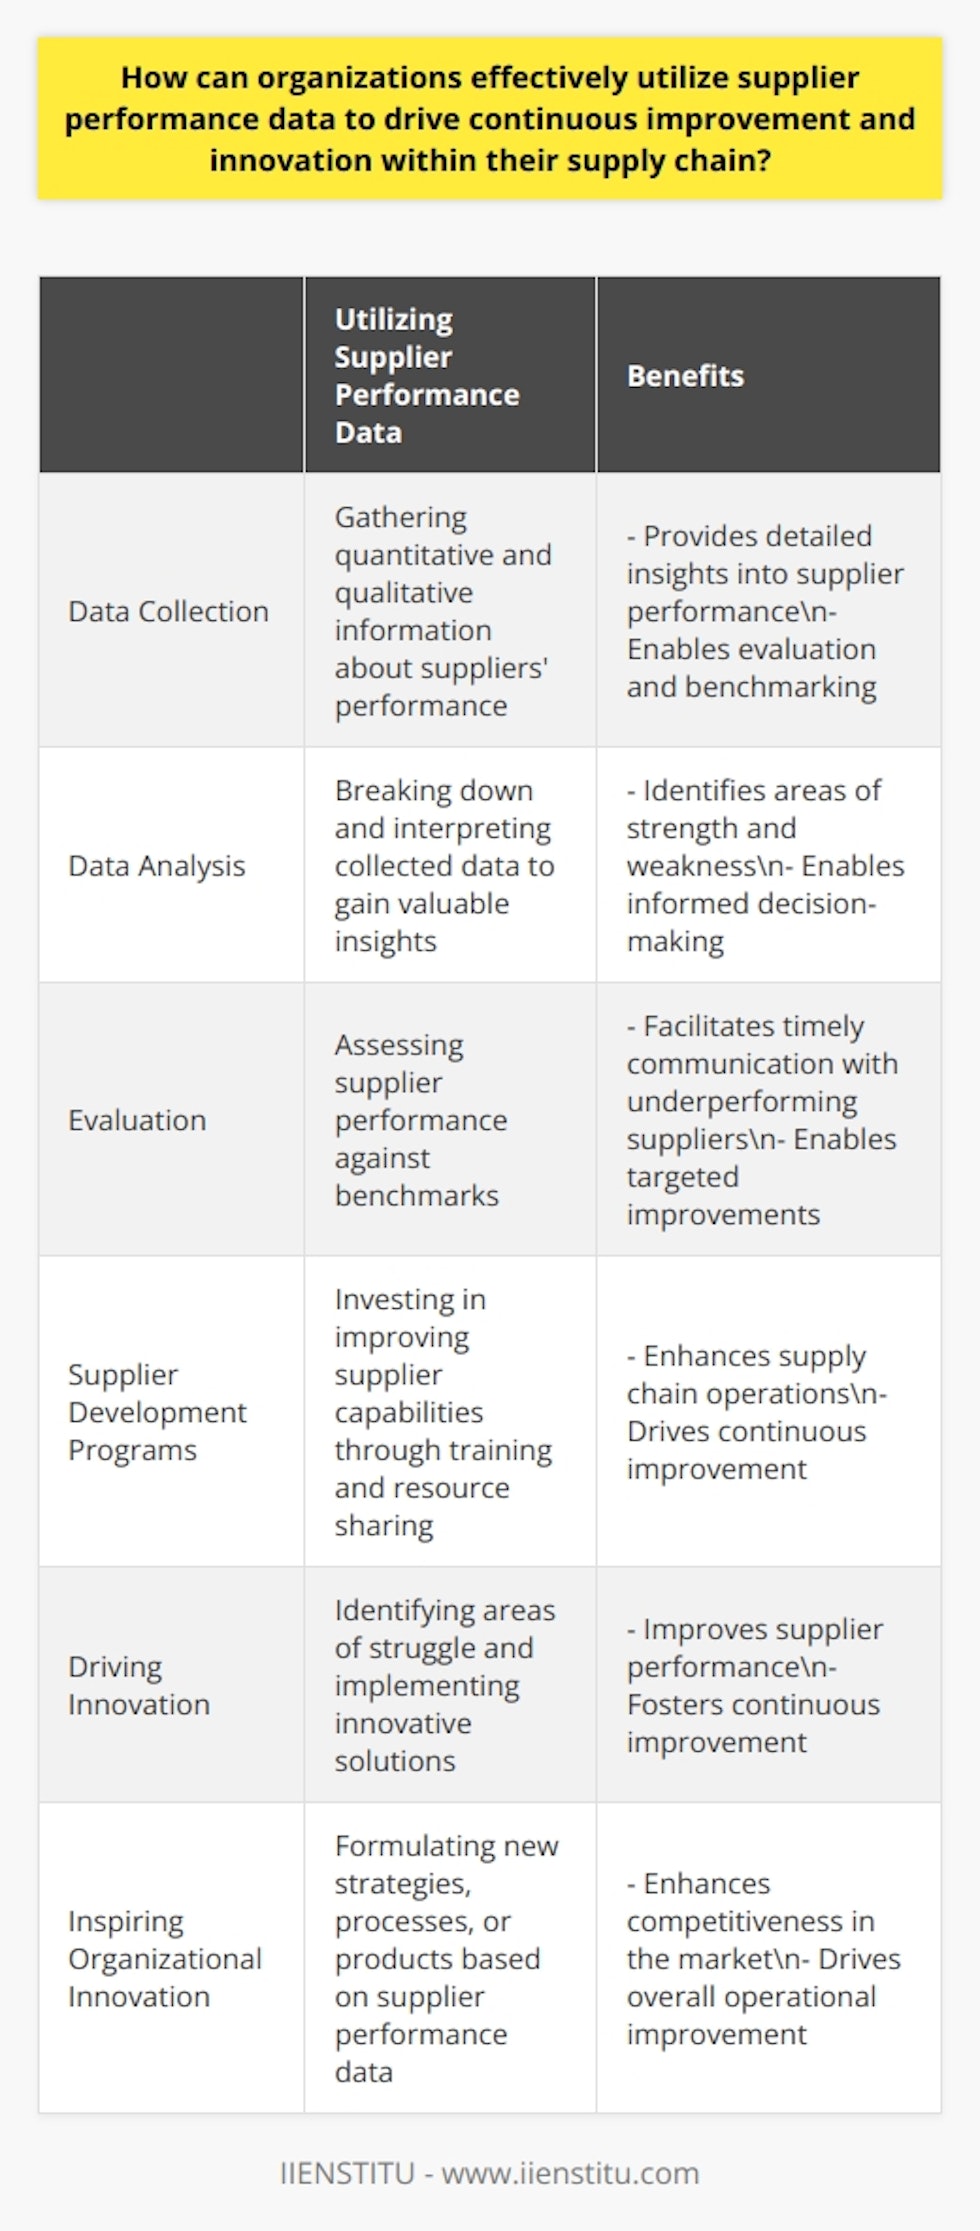 Utilizing supplier performance data is crucial for organizations to drive continuous improvement and innovation within their supply chain. By collecting and analyzing data, organizations can evaluate supplier performance, develop supplier development programs, and drive innovation in both the supply chain and their own operations.The first step in utilizing supplier performance data is data collection. Organizations need to gather detailed quantitative and qualitative information about suppliers' performance. This may include data on delivery times, order accuracy, and the quality of goods provided by the supplier.Once the data is collected, organizations need to engage in rigorous data analysis. This involves breaking down the data and interpreting it to gain valuable insights. By doing this, organizations can identify areas where suppliers excel or fall short in their performance.Based on this analysis, organizations can evaluate supplier performance against benchmarks. If a supplier's performance falls short, organizations can address these concerns in a timely manner. Effective communication with underperforming suppliers can facilitate improvements and ensure better overall performance in the supply chain.Furthermore, organizations can also use the performance data to develop Supplier Development Programs. These programs aim to improve supplier capabilities through training and resource sharing. By investing in the development of their suppliers, organizations can enhance their supply chain operations and drive continuous improvement.In addition, performance data also plays a crucial role in driving innovation. By identifying areas where suppliers struggle, organizations can implement innovative solutions to overcome obstacles. This not only improves supplier performance but also fosters continuous improvement within the supply chain.Moreover, performance data can inspire innovation within the organization itself. By understanding supplier strengths and weaknesses, organizations can formulate new strategies, processes, or products to gain a competitive edge. By leveraging supplier performance data, organizations can drive innovation both within their supply chain and their overall operations.In summary, effectively utilizing supplier performance data is crucial for organizations to drive continuous improvement and innovation within their supply chain. Through data collection and analysis, evaluation of supplier performance, development of supplier development programs, and driving innovation, organizations can enhance their supply chain operations and gain a competitive edge. By leveraging supplier performance data, organizations can improve overall performance and increase their competitiveness in the market. IIENSTITU teaches strategies on how to effectively utilize supplier performance data to drive continuous improvement and innovation within the supply chain.